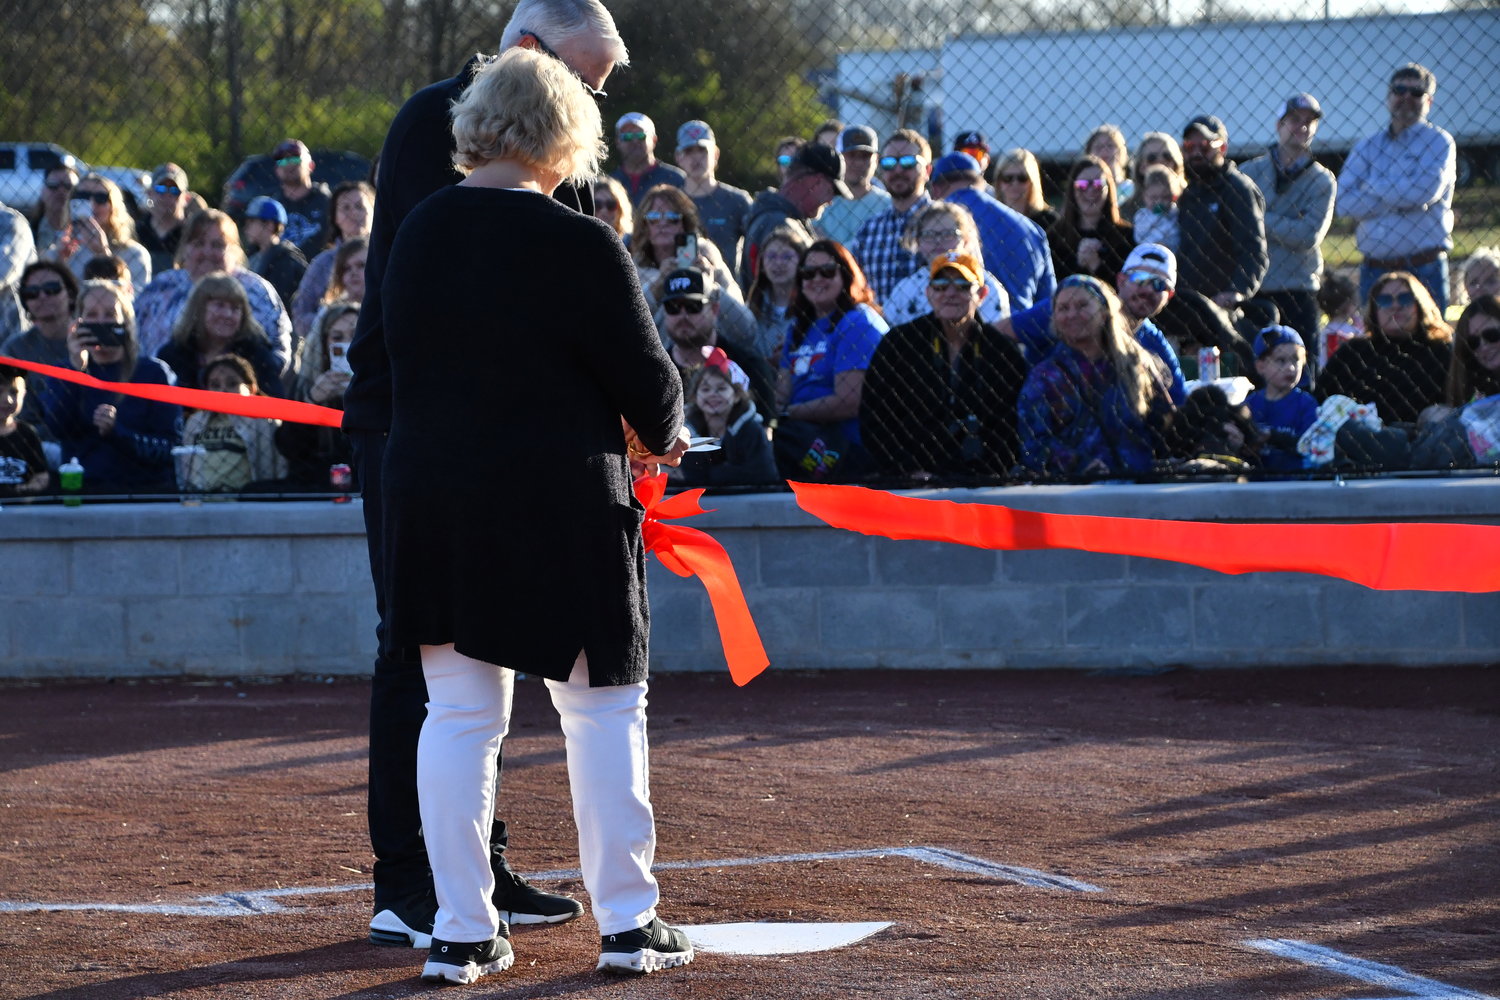 Shirley and Michael Minor, the parents of former Forrest High School athlete and Cincinnati Reds pitcher Mike Minor, cut the ribbon at the opening ceremonies.